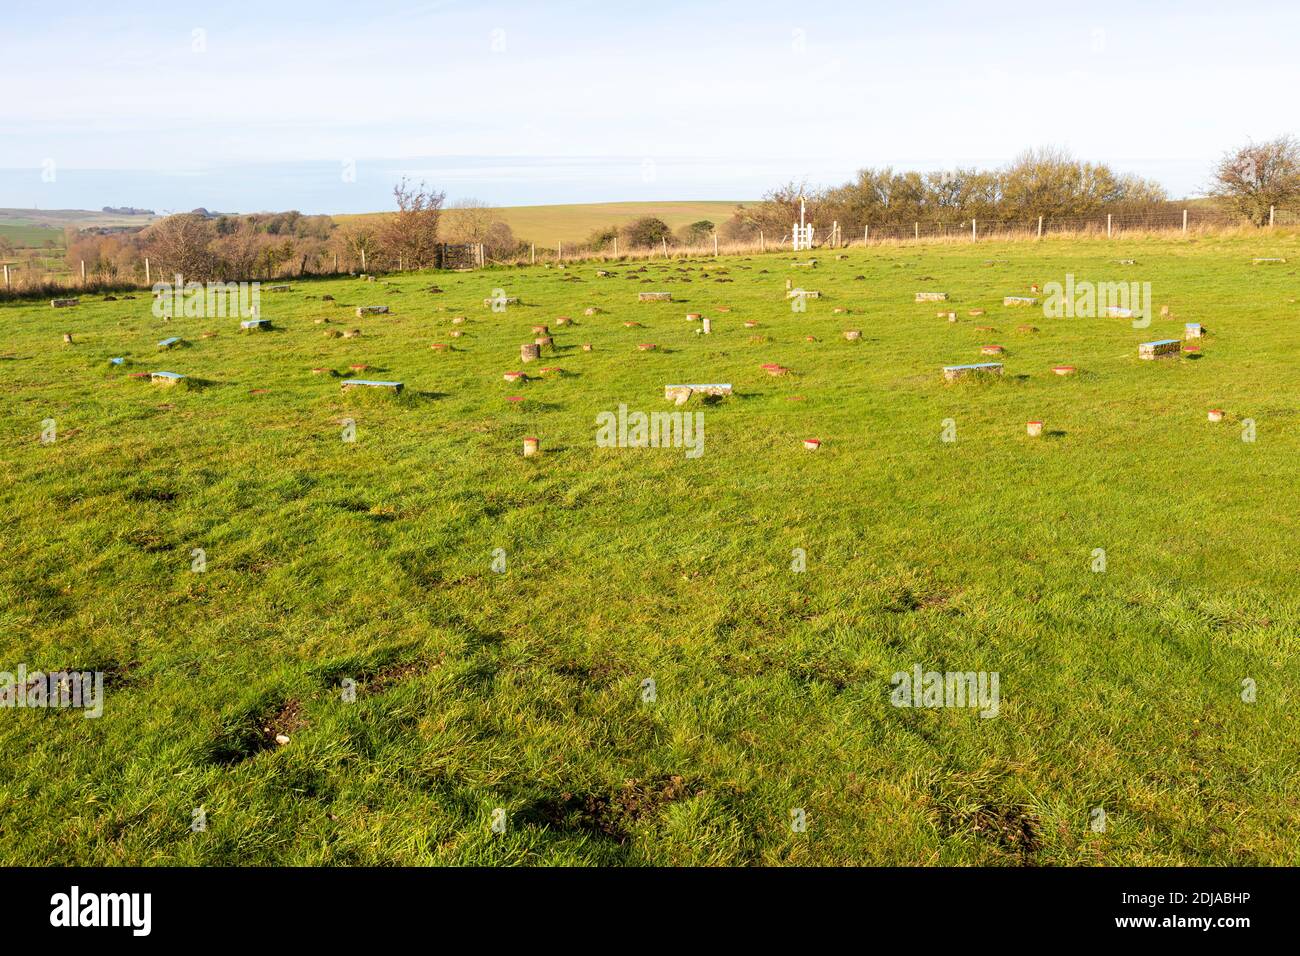 Concrete post markers at neolithic The Sanctuary prehistoric site, Overton Hill, Wiltshire, England, UK Stock Photo